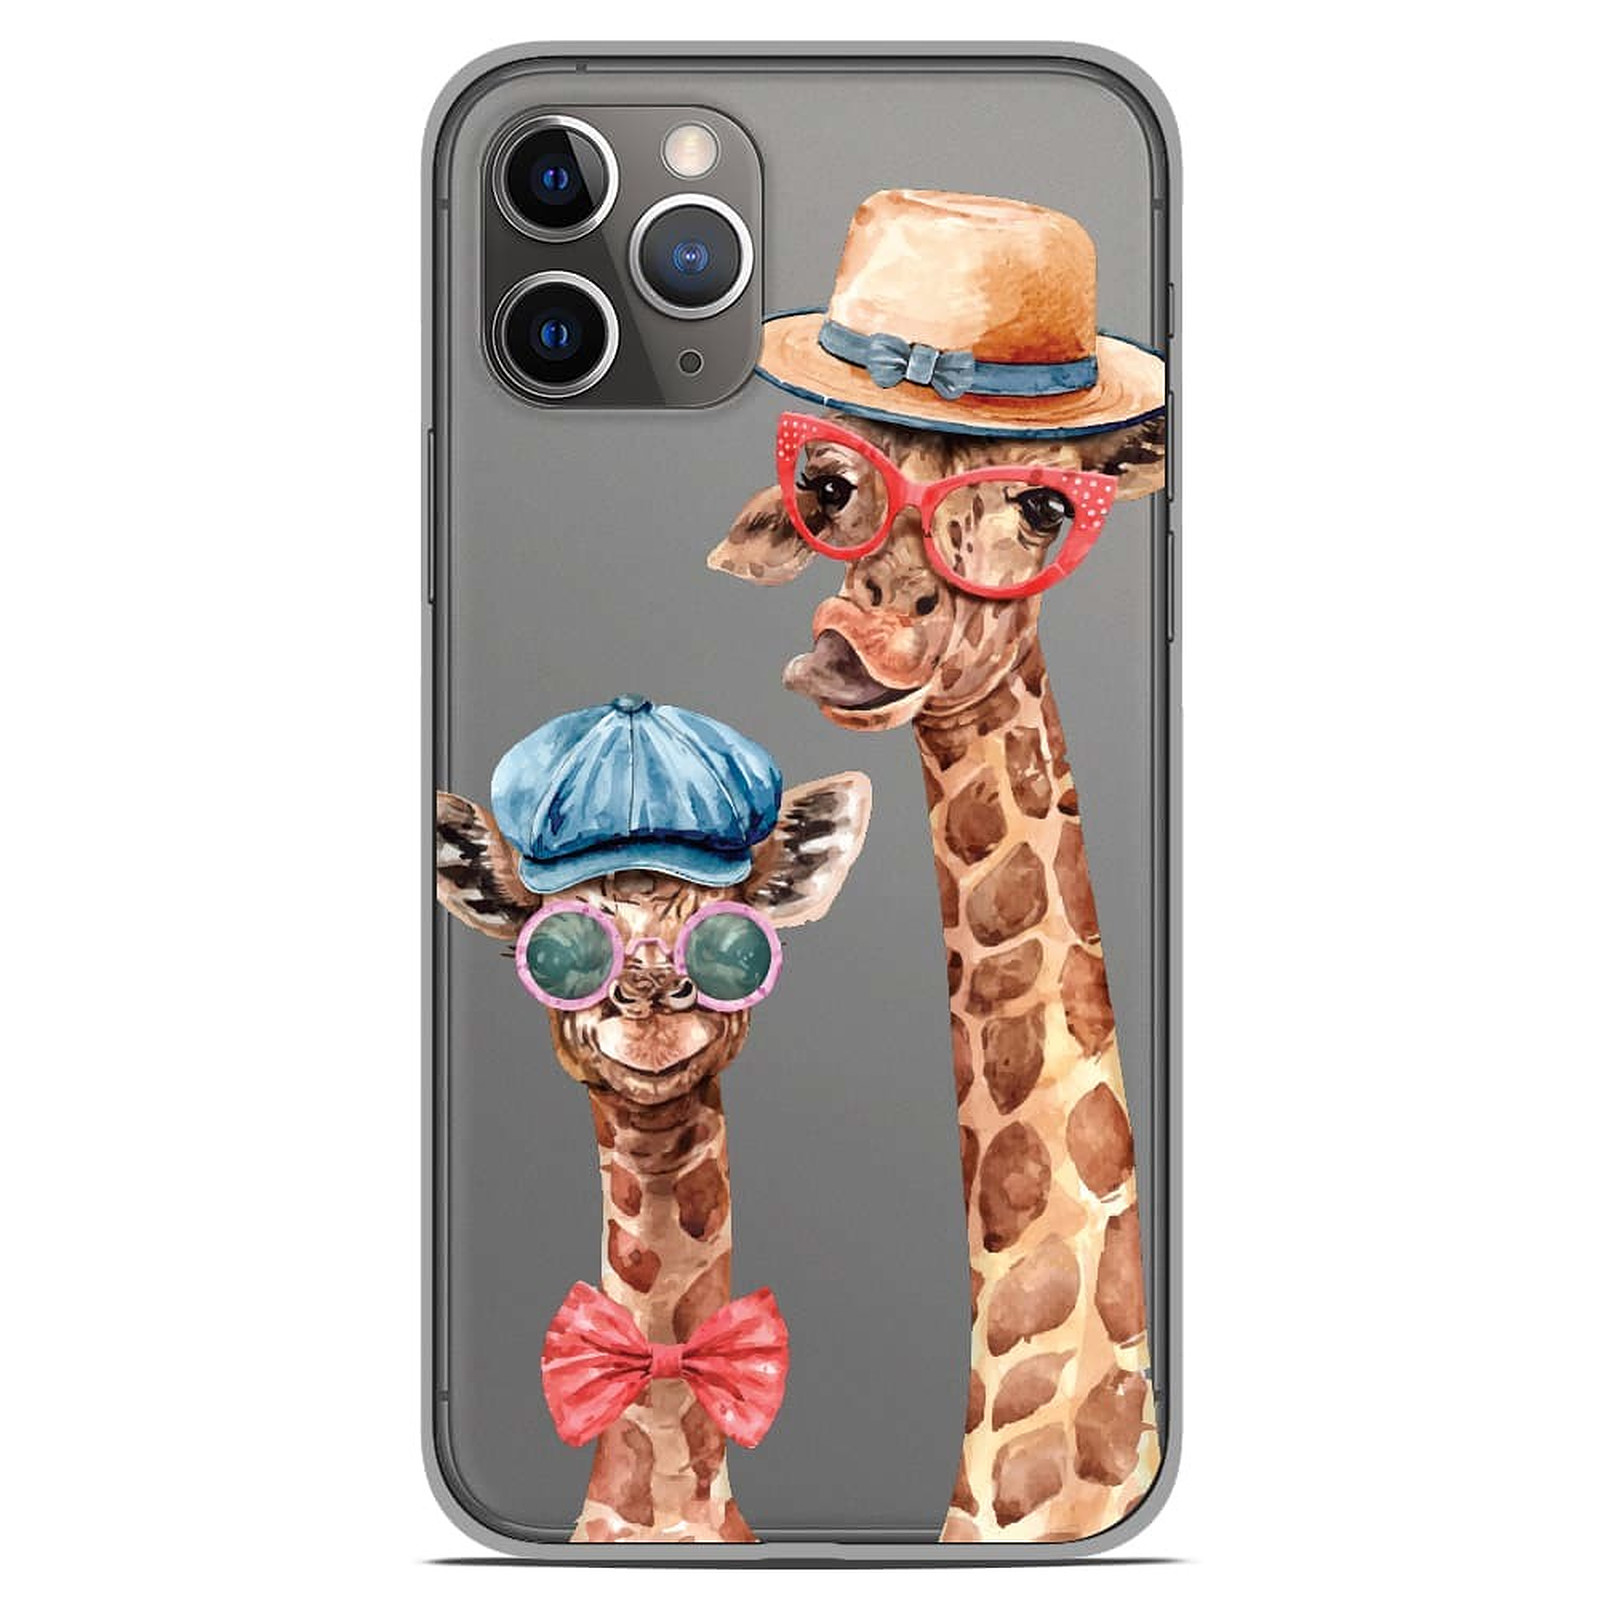 1001 Coques Coque silicone gel Apple iPhone 11 Pro motif Funny Girafe - Coque telephone 1001Coques